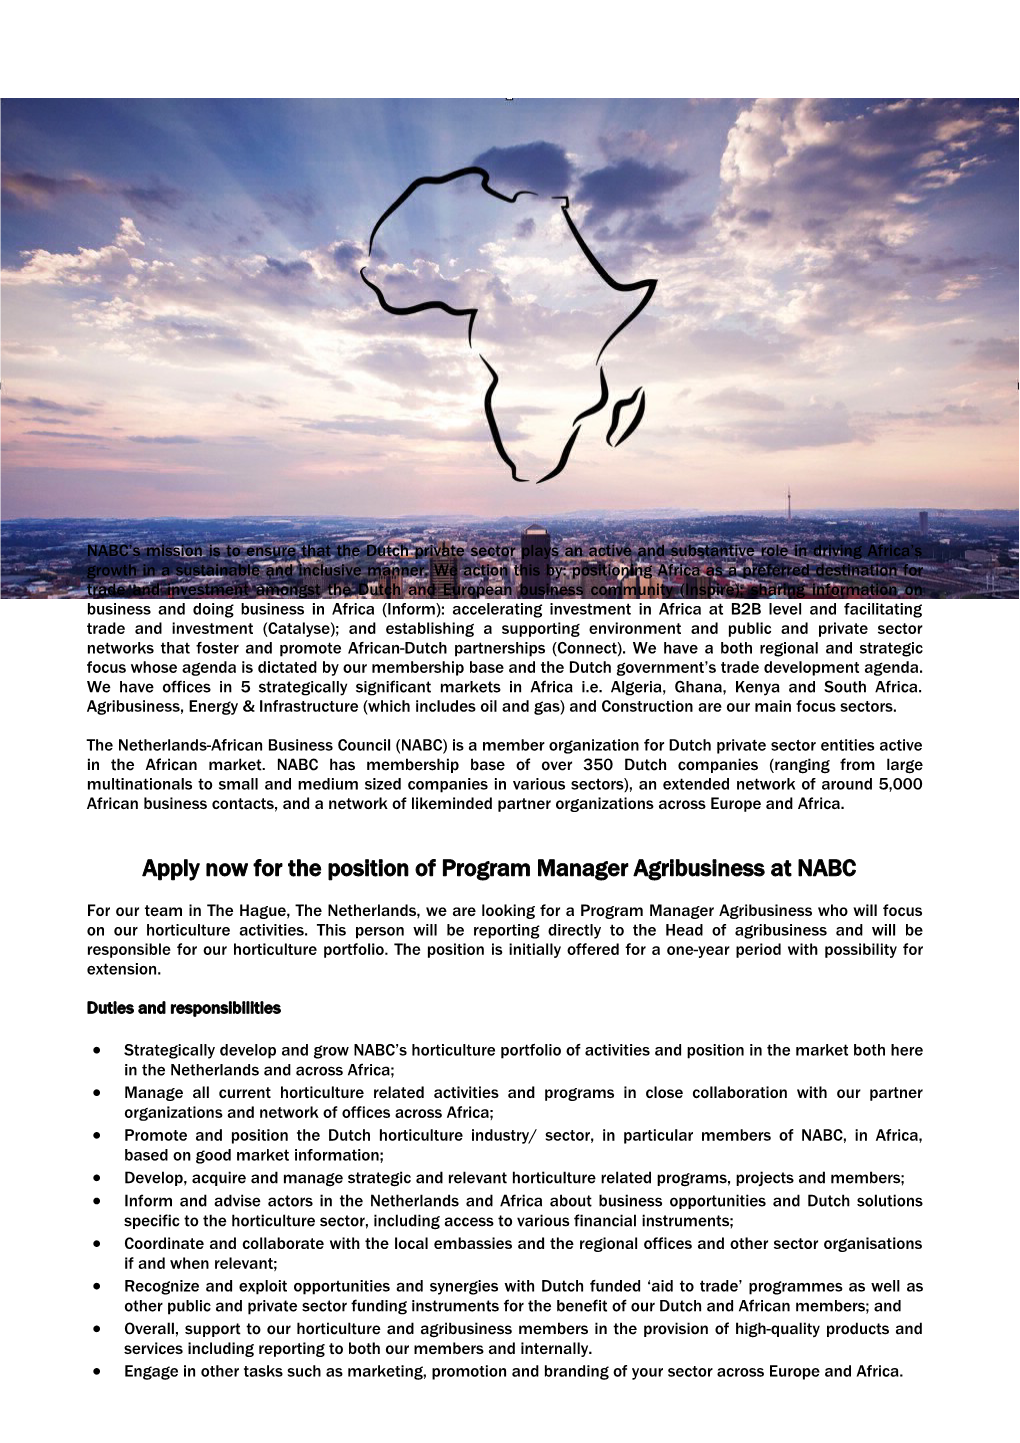 Apply Now for the Position of Program Manager Agribusiness Atnabc